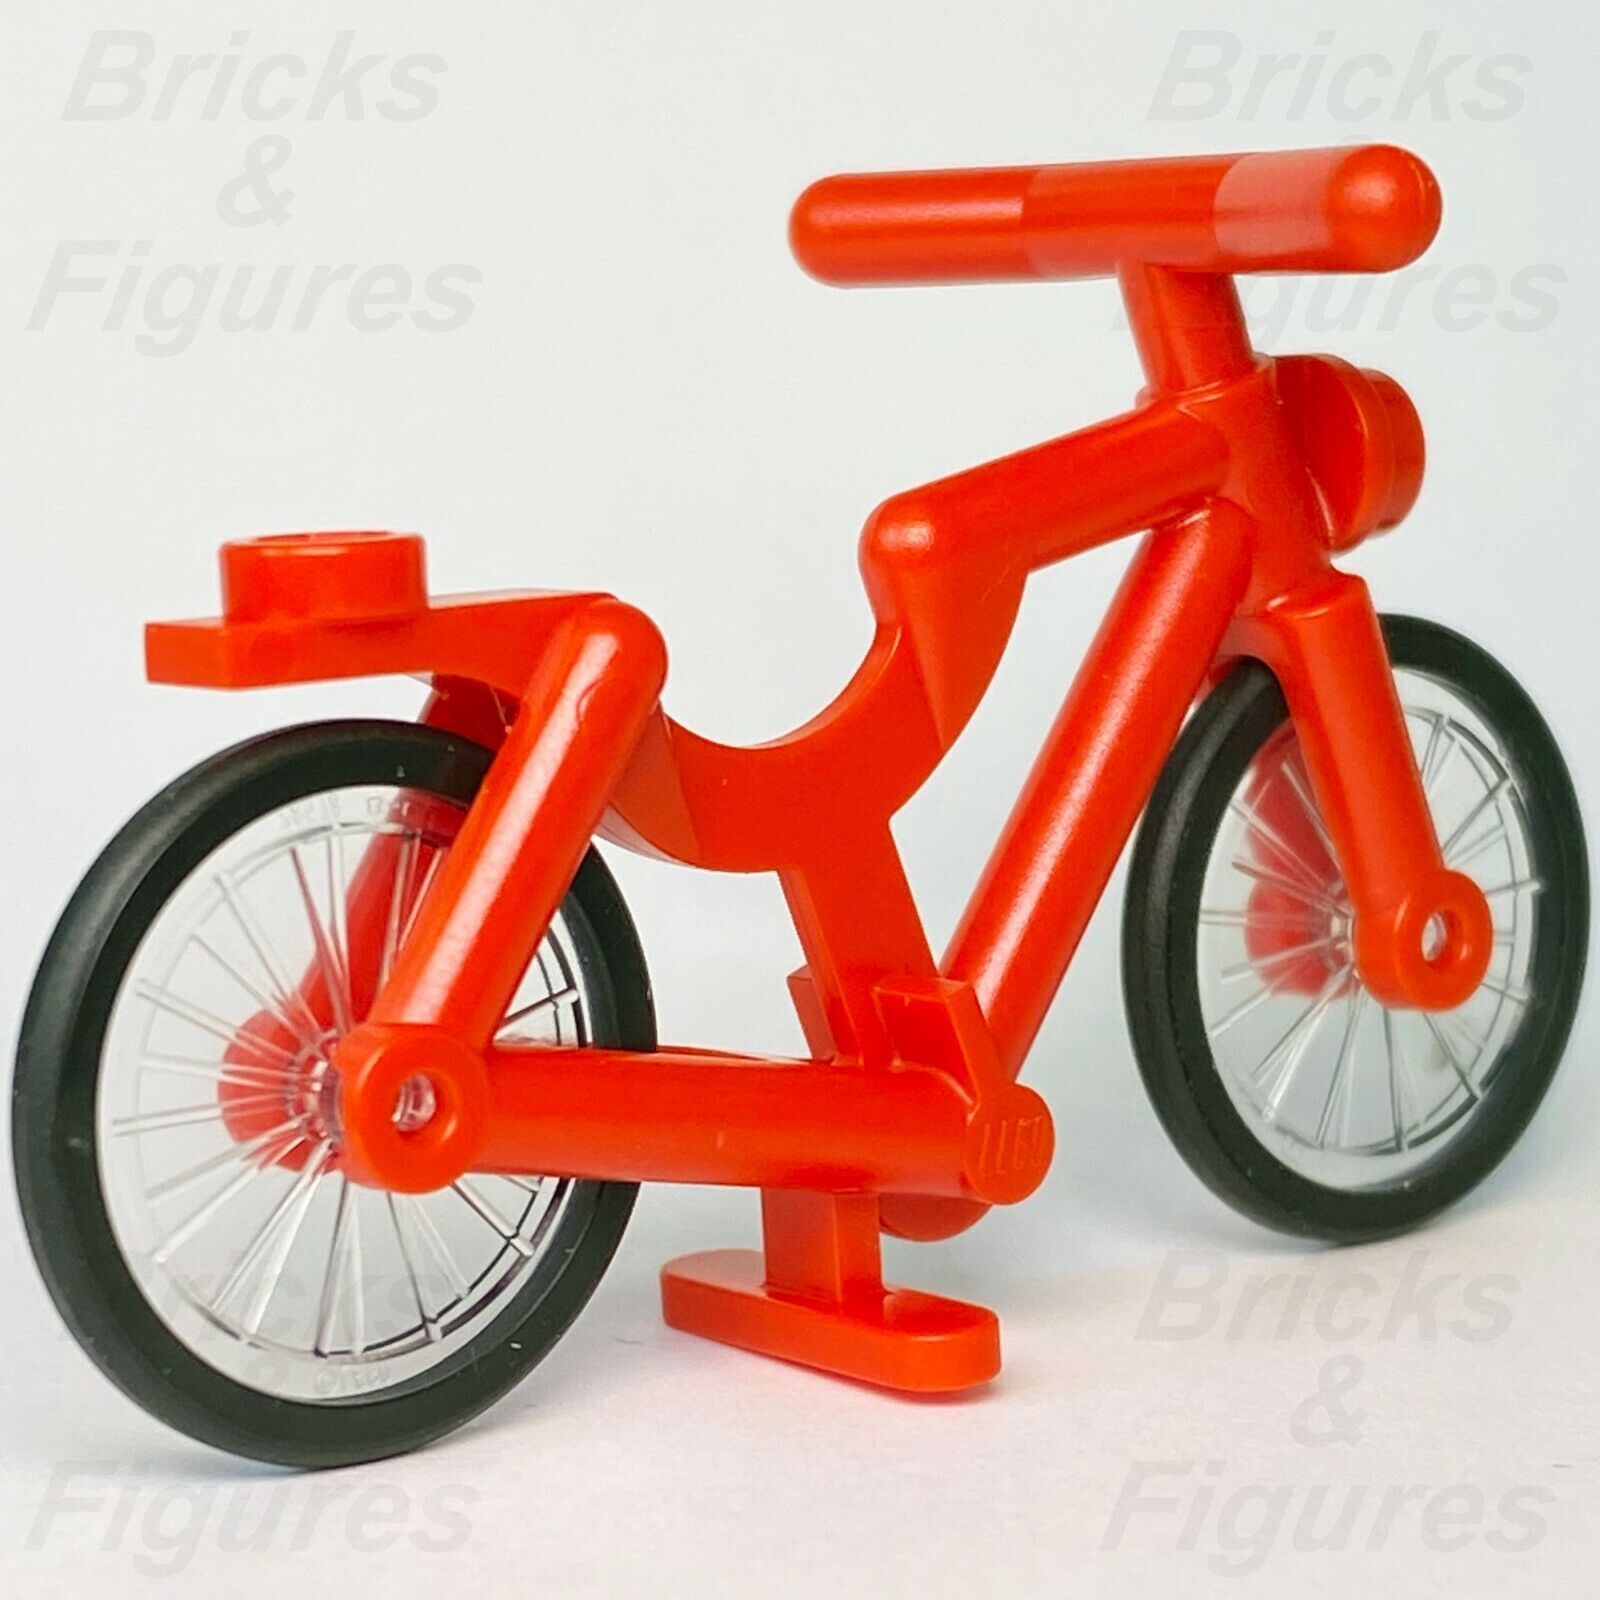 New Town City Recreation LEGO Red Bicycle with Wheels Sport Bike Genuine Parts - Bricks & Figures